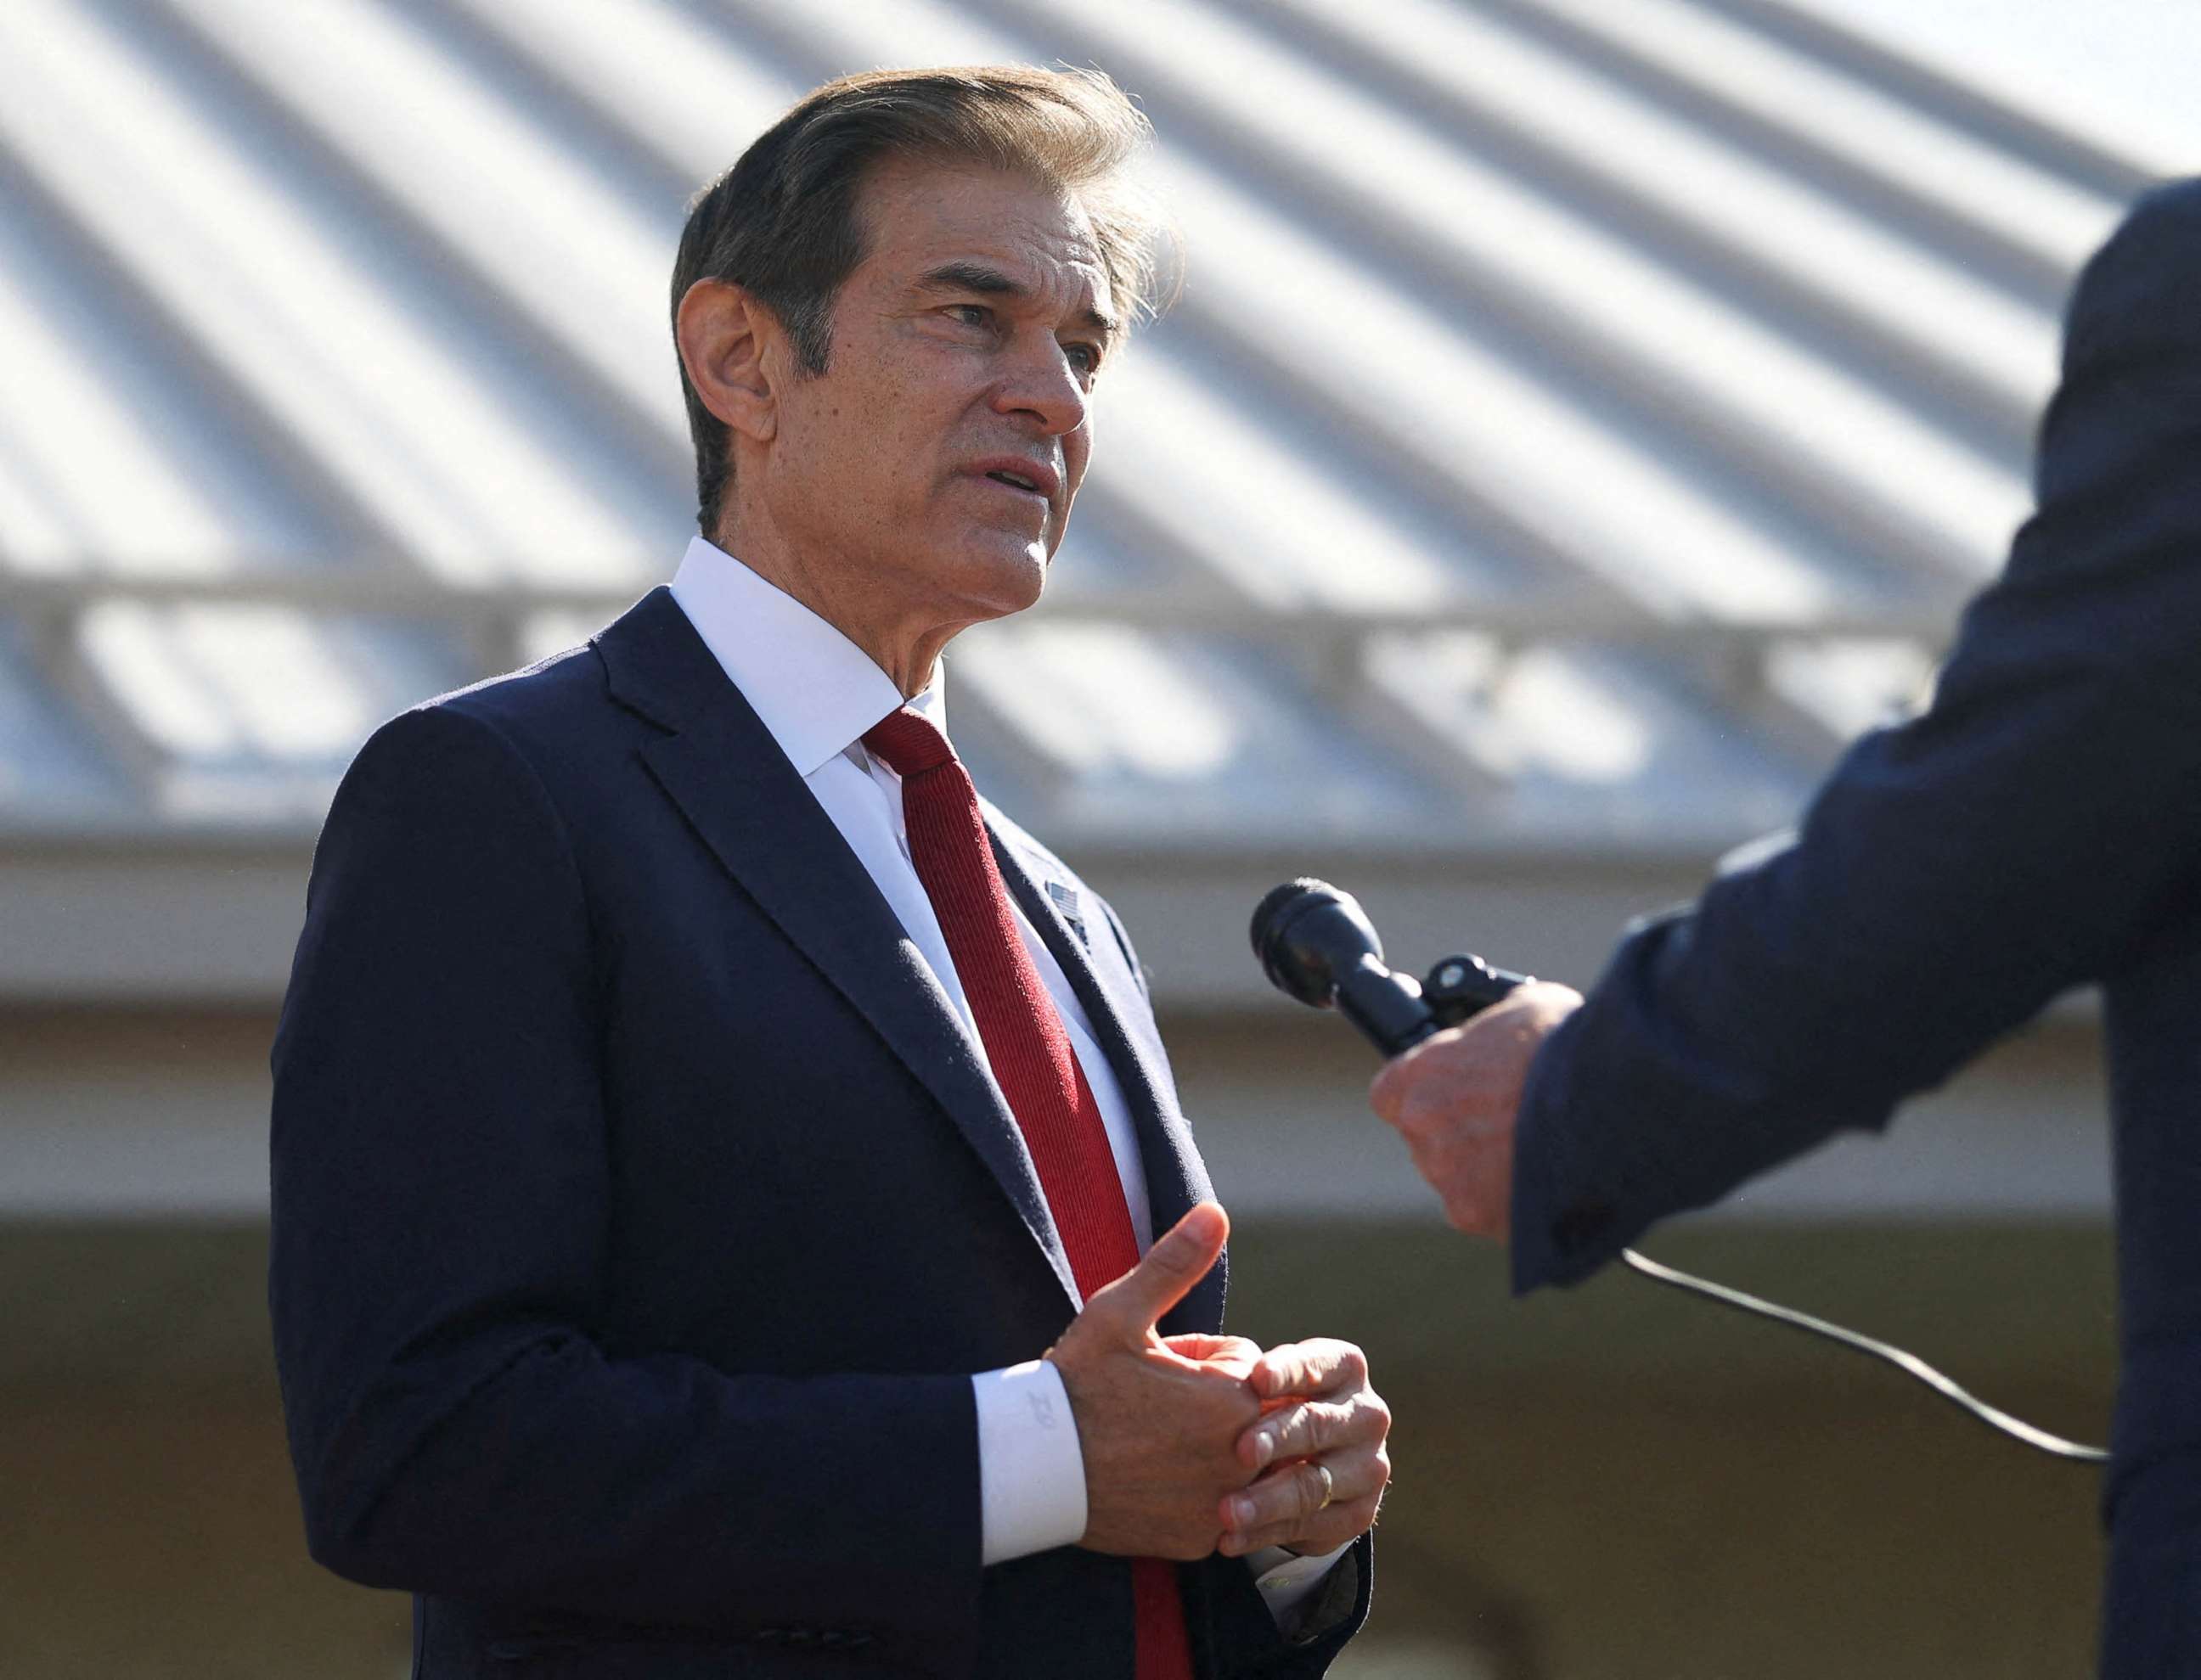 PHOTO: Pennsylvania Republican U.S. Senate candidate Dr. Mehmet Oz is being interviewed after he cast his vote in Bryn Athyn, Pa., May 17, 2022. 